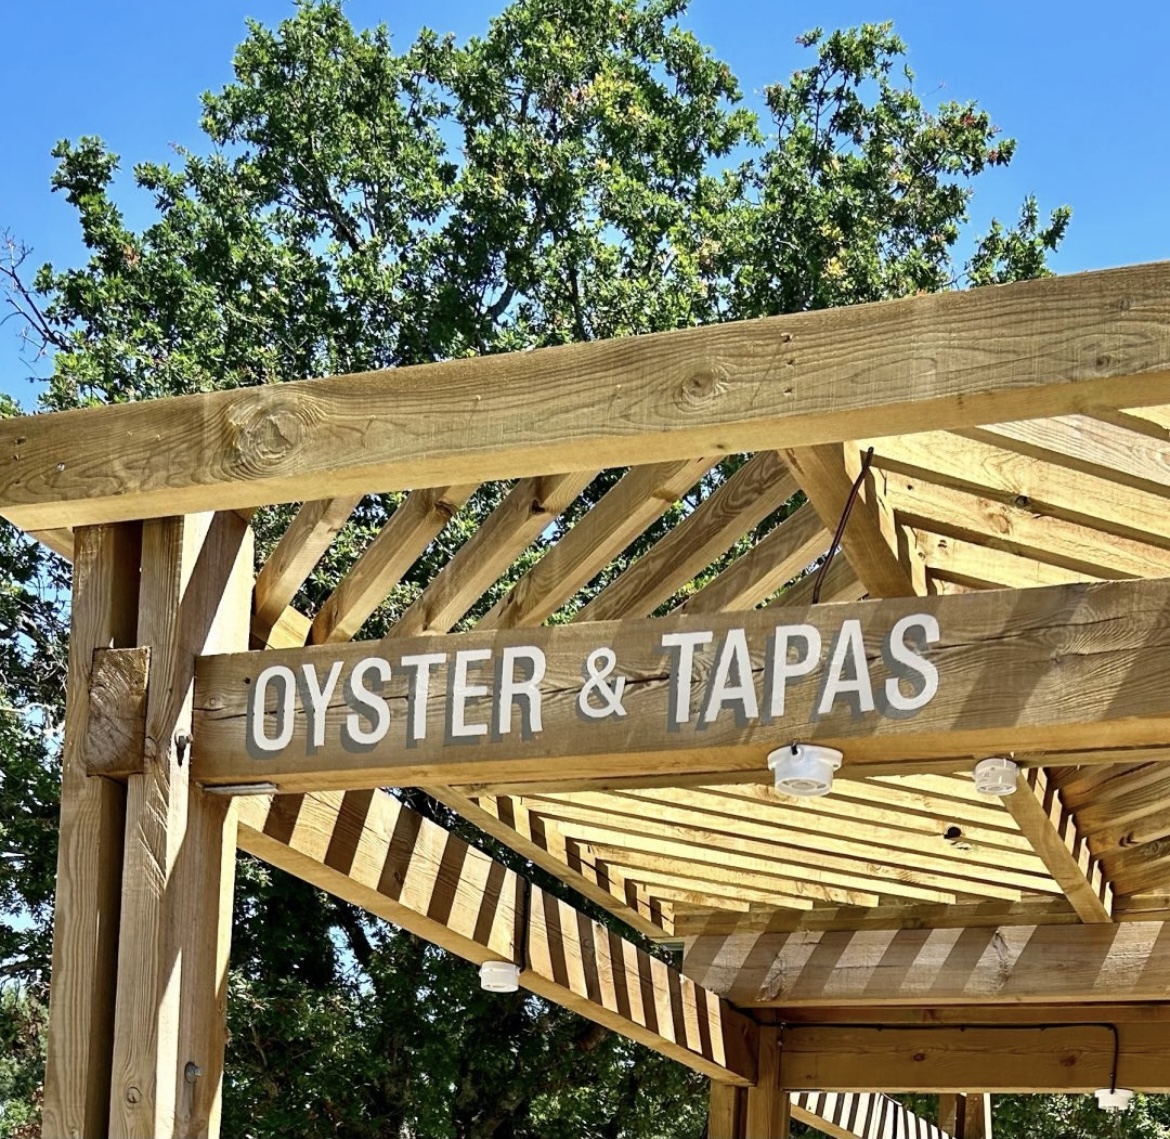 Oyster & Tapas